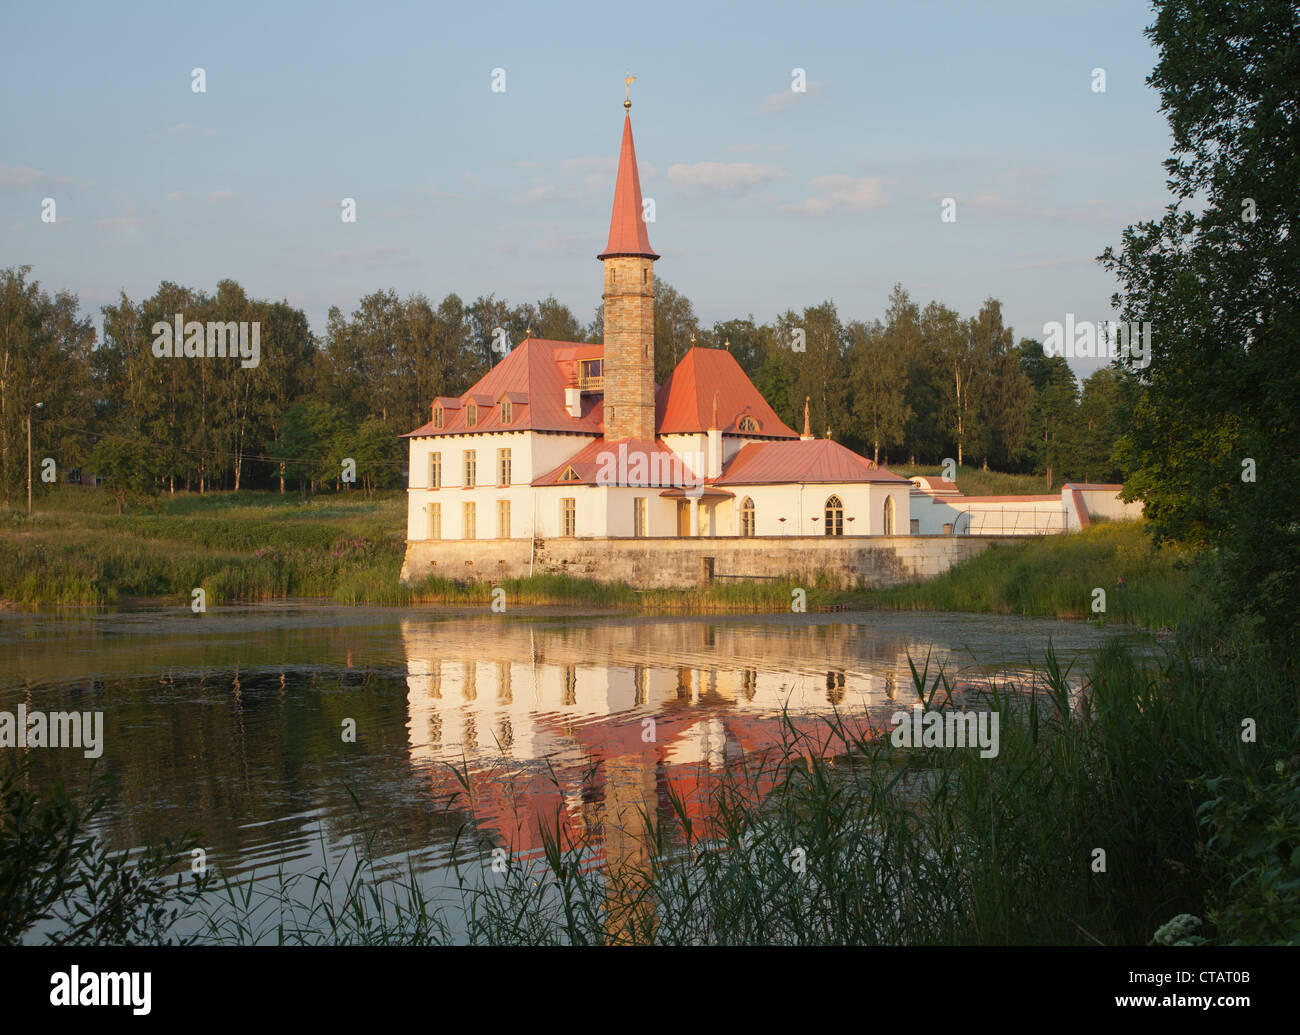 Priory Palace in Gatchina, Russia. Stock Photo